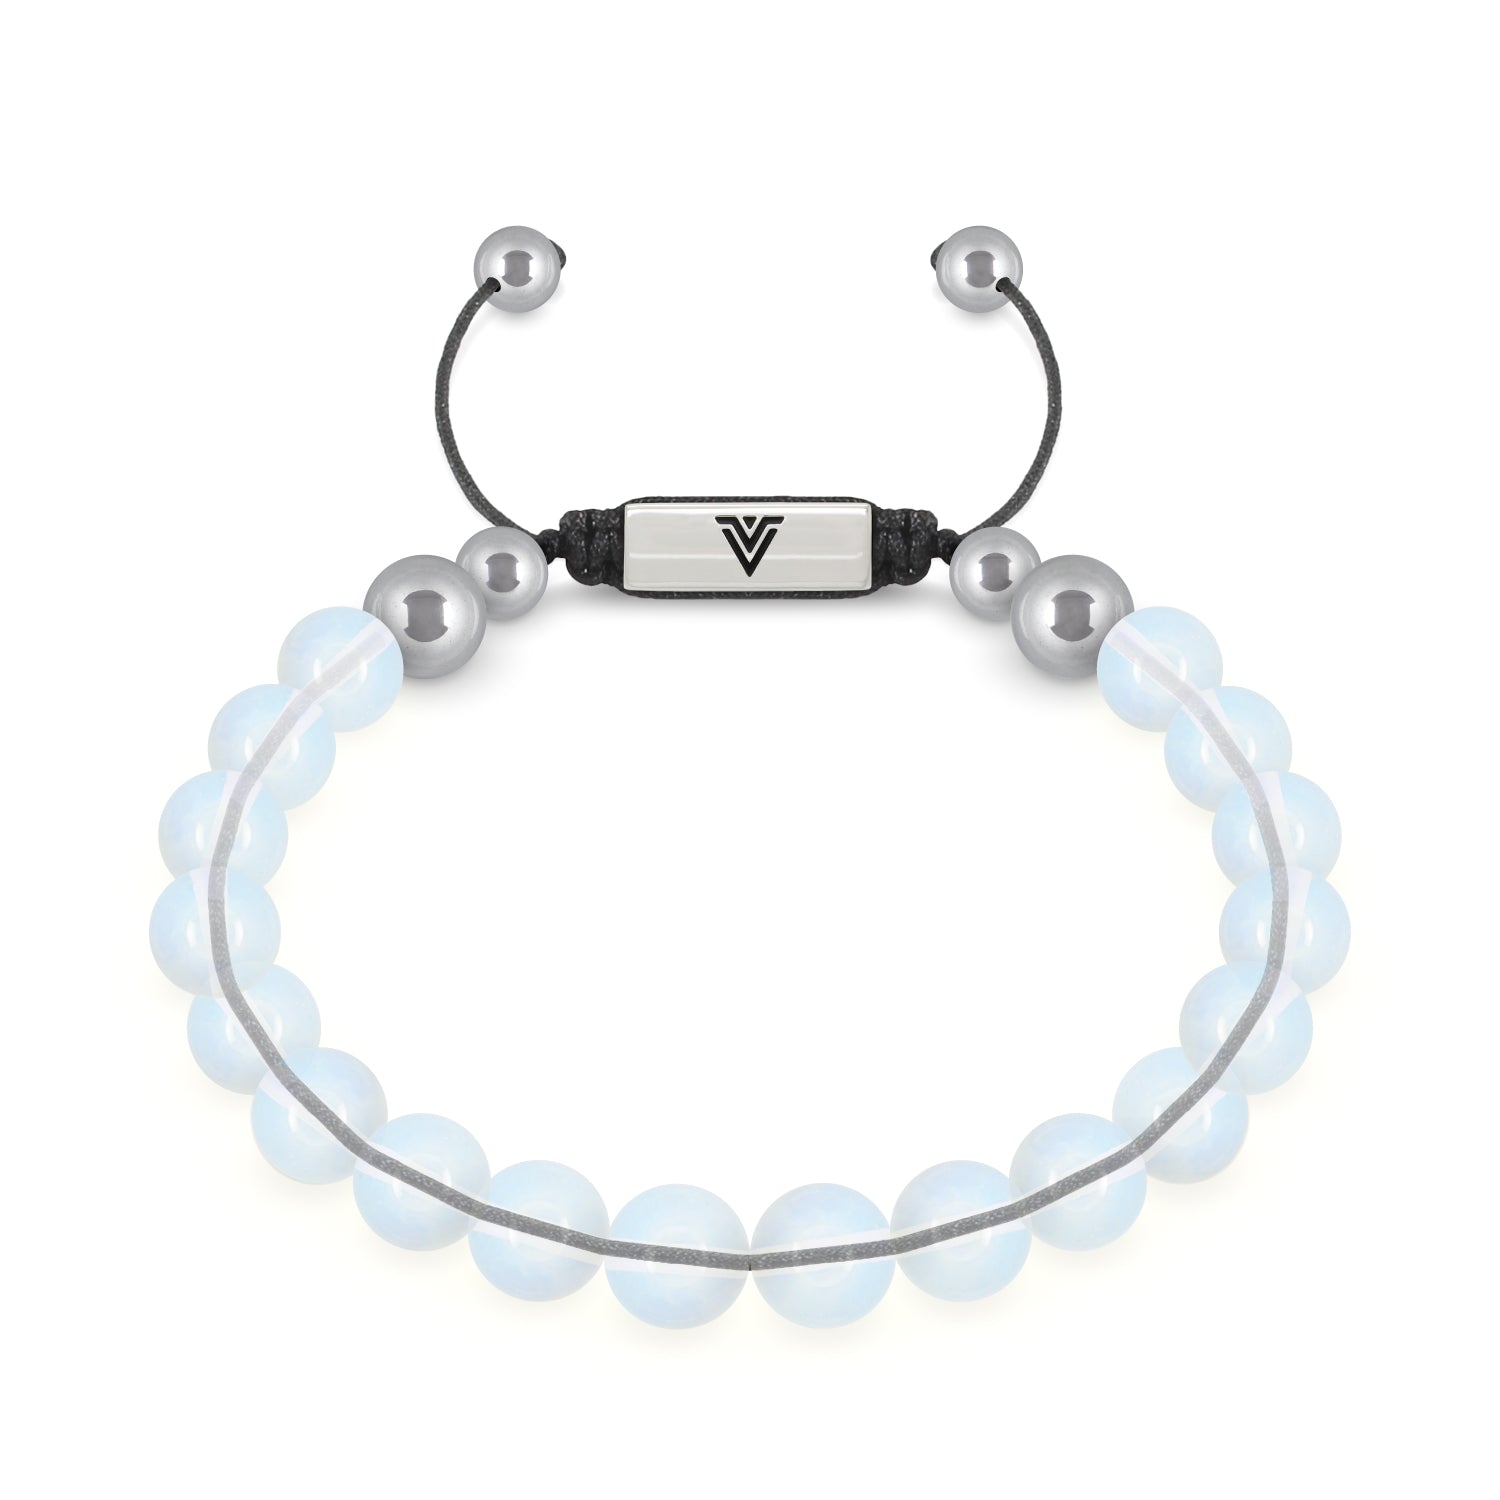 Front view of an 8mm Opalite beaded shamballa bracelet with silver stainless steel logo bead made by Voltlin